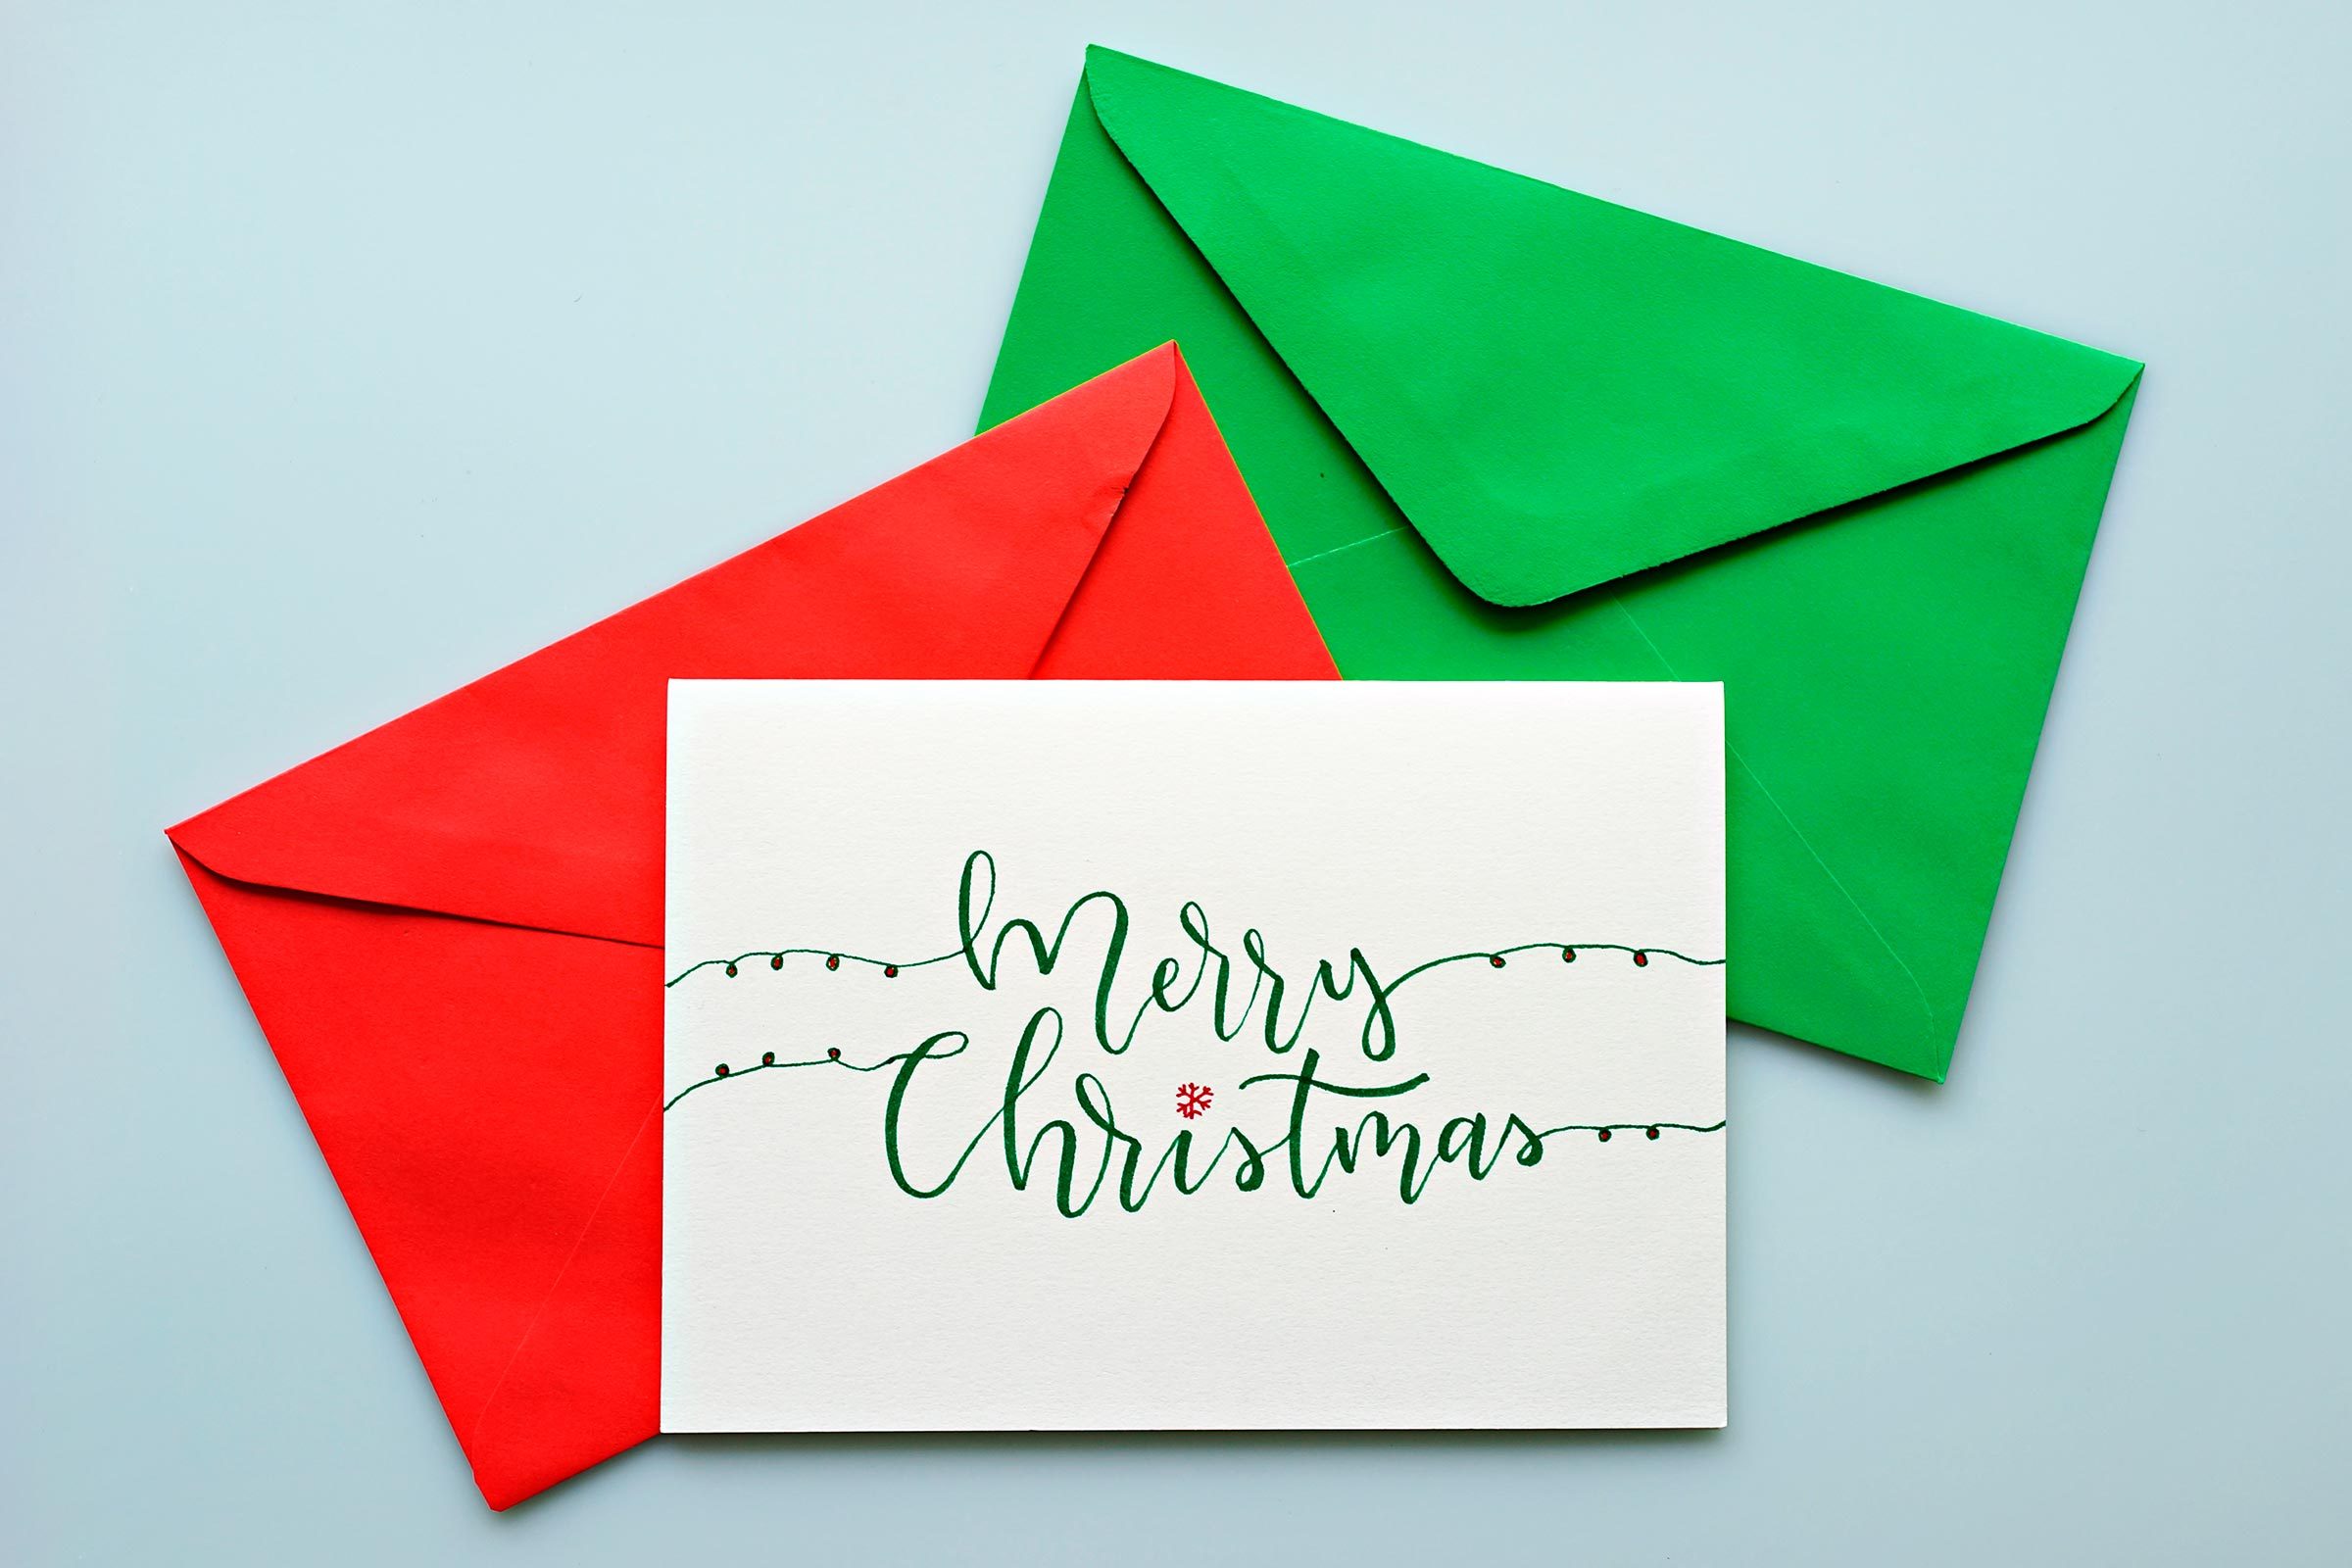 Top view hand drawn Christmas greeting cards with envelope.